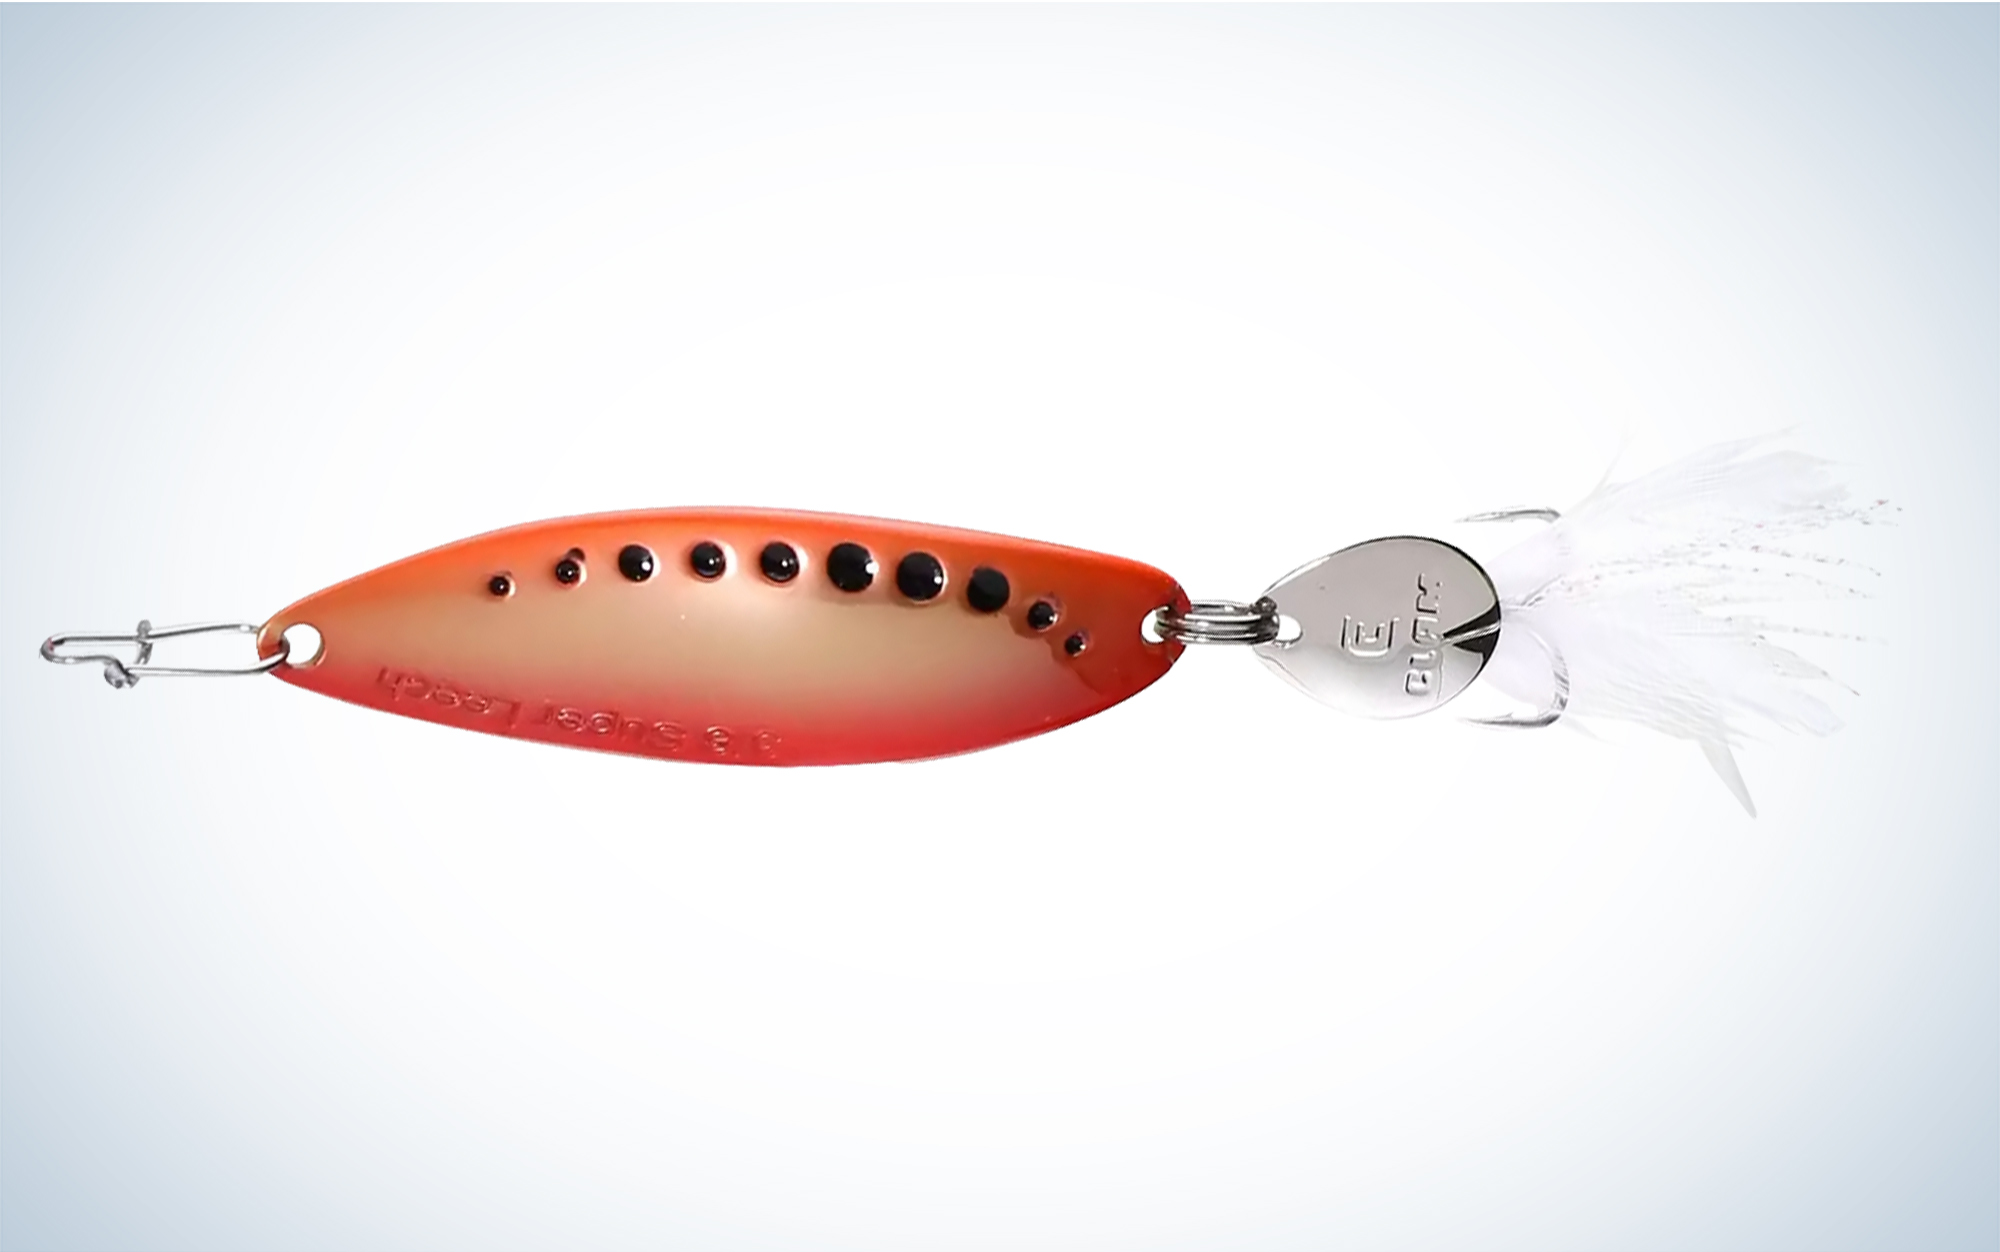 The Clam Leech Flutter Spoon is one of the best walleye ice fishing lures.